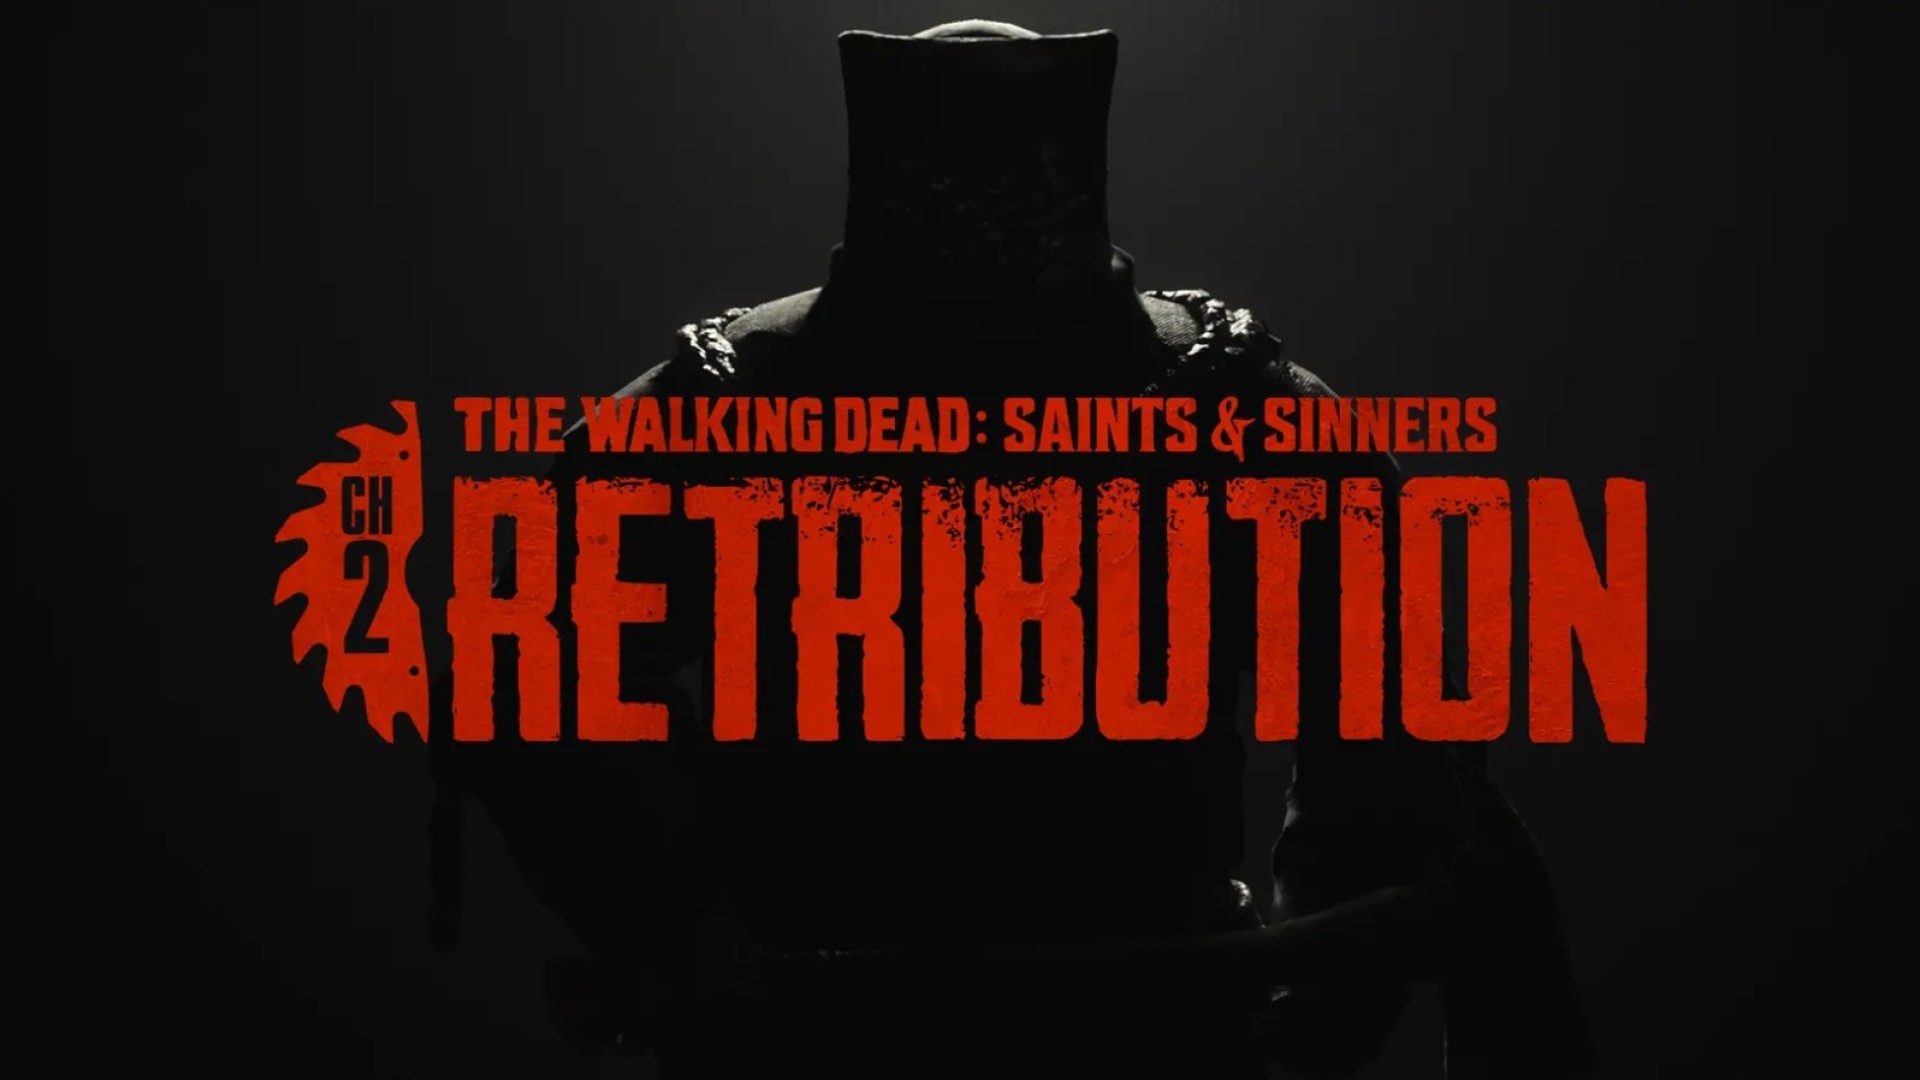 the-walking-dead-saints-and-sinners-chapter-2-retribution-announced